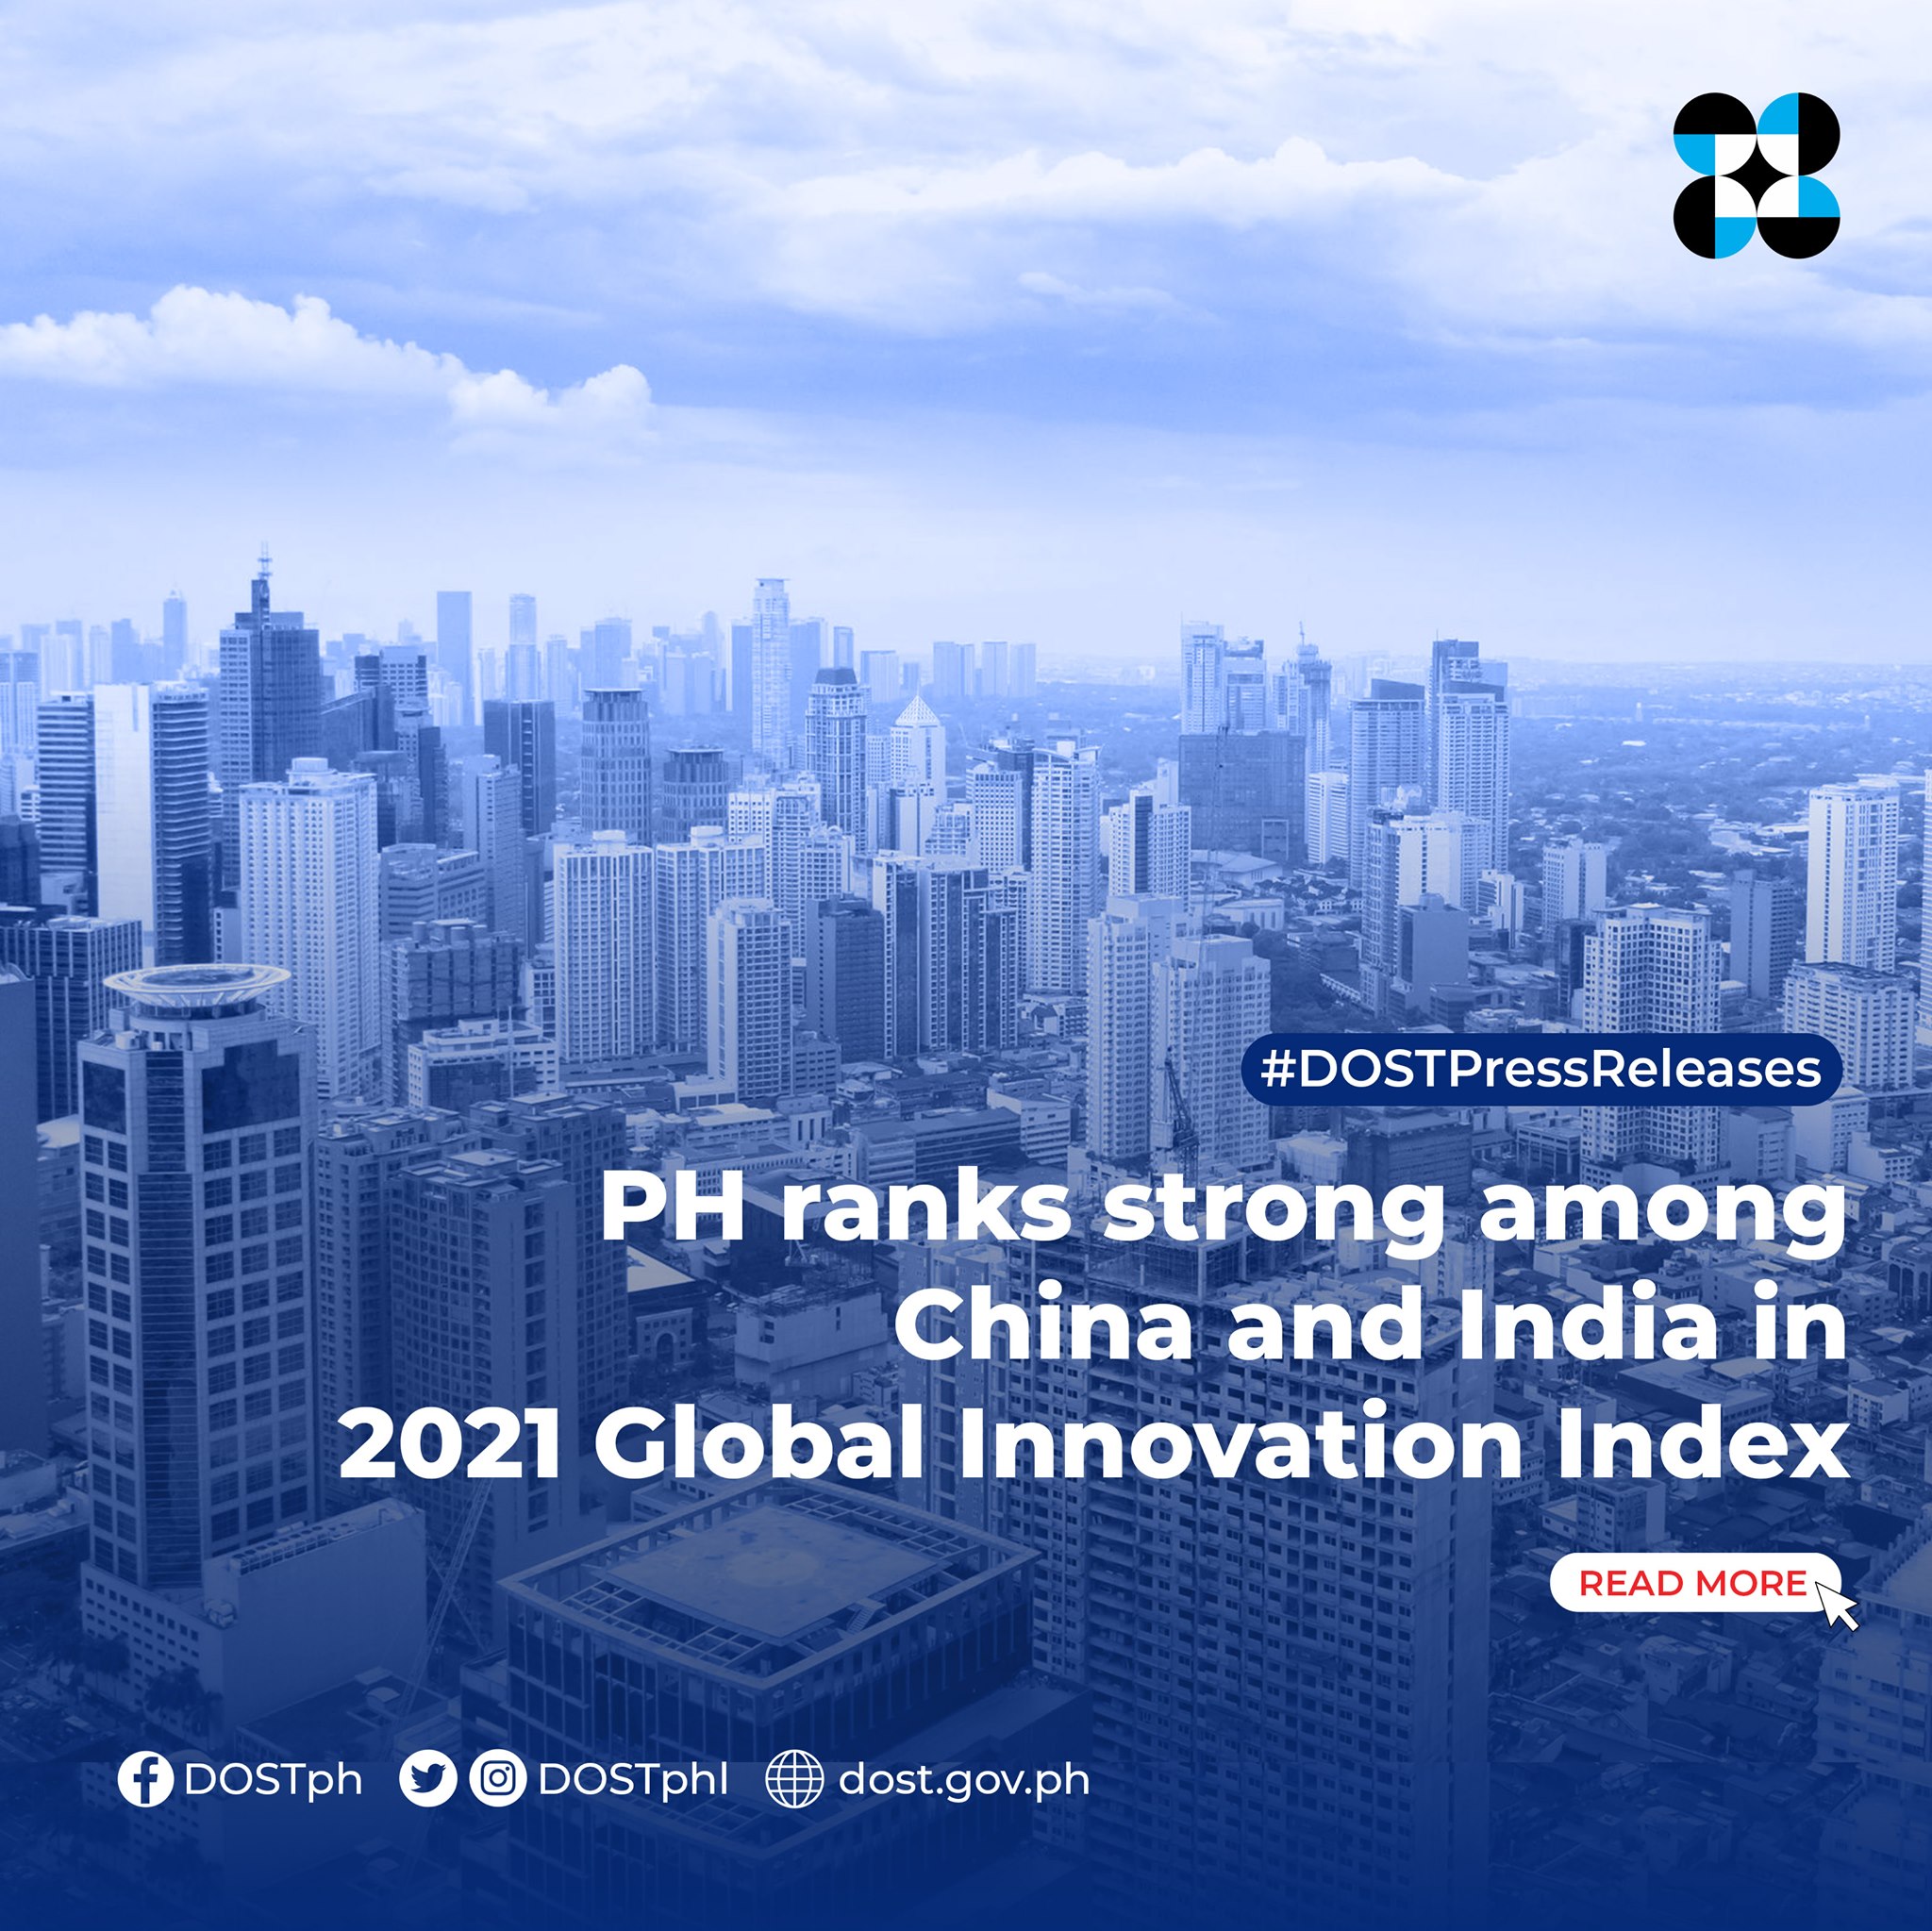 PH ranks strong among China and India in 2021 Global Innovation Index image